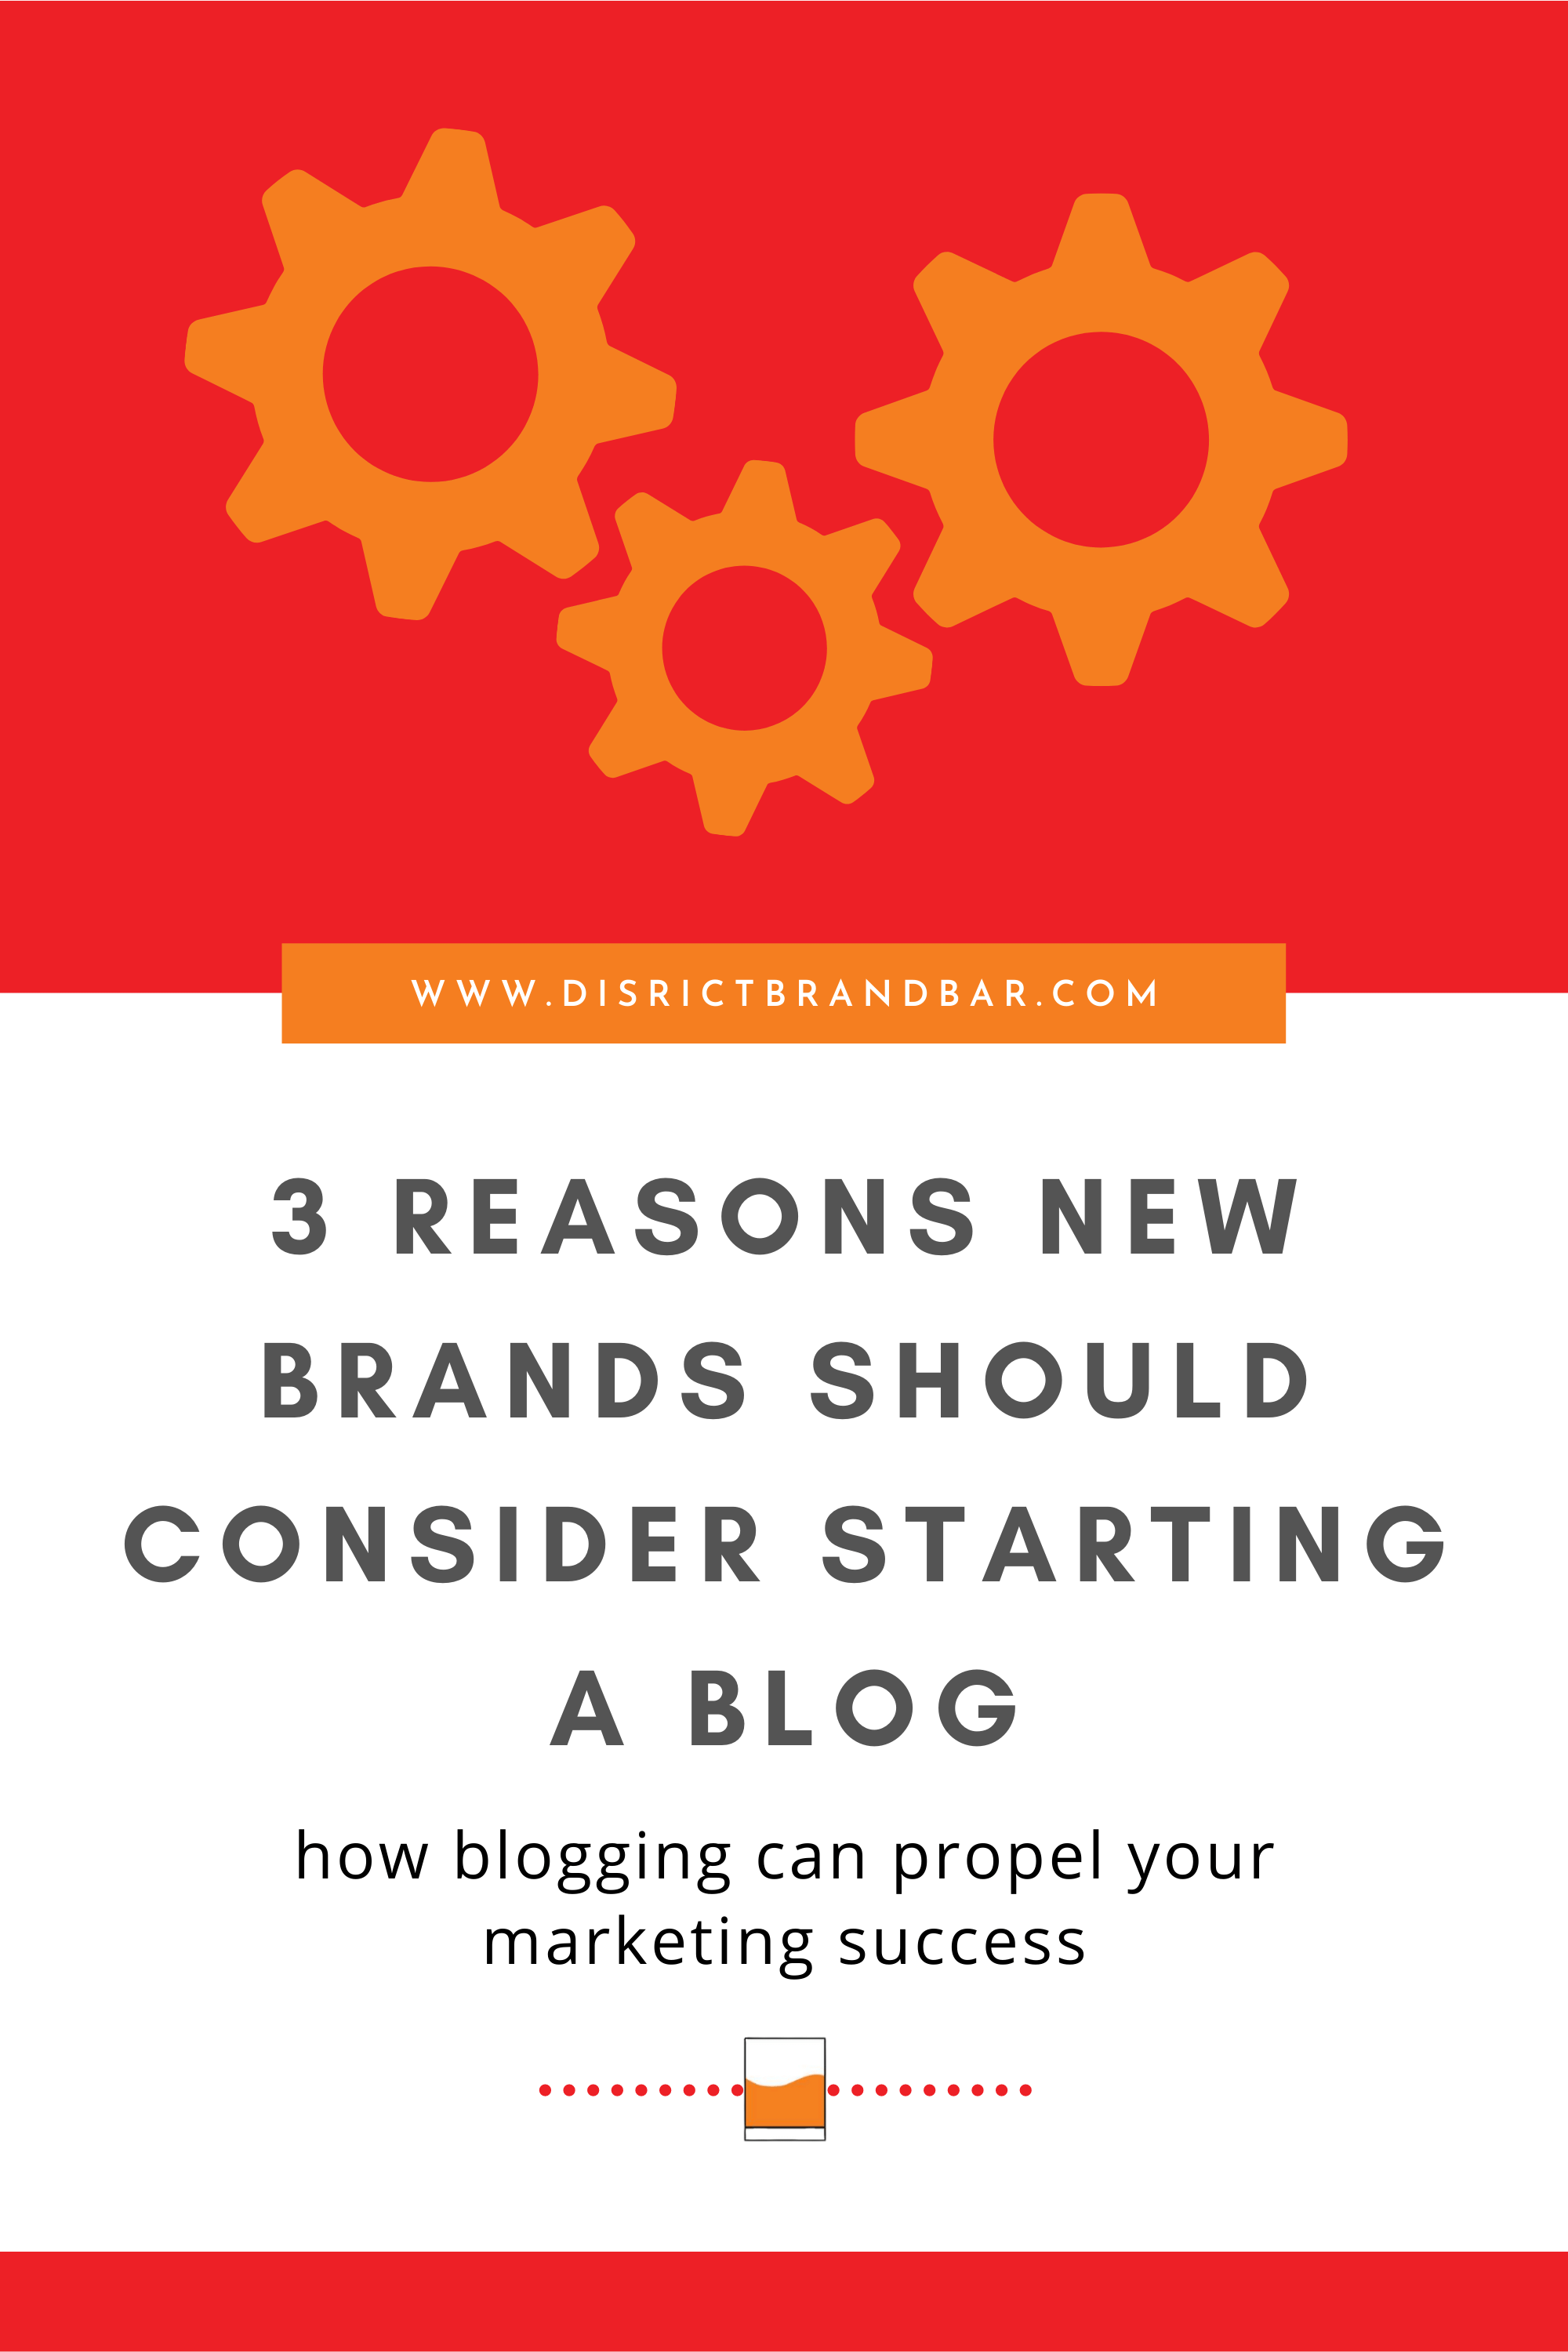 3 reasons new brands should consider starting a blog